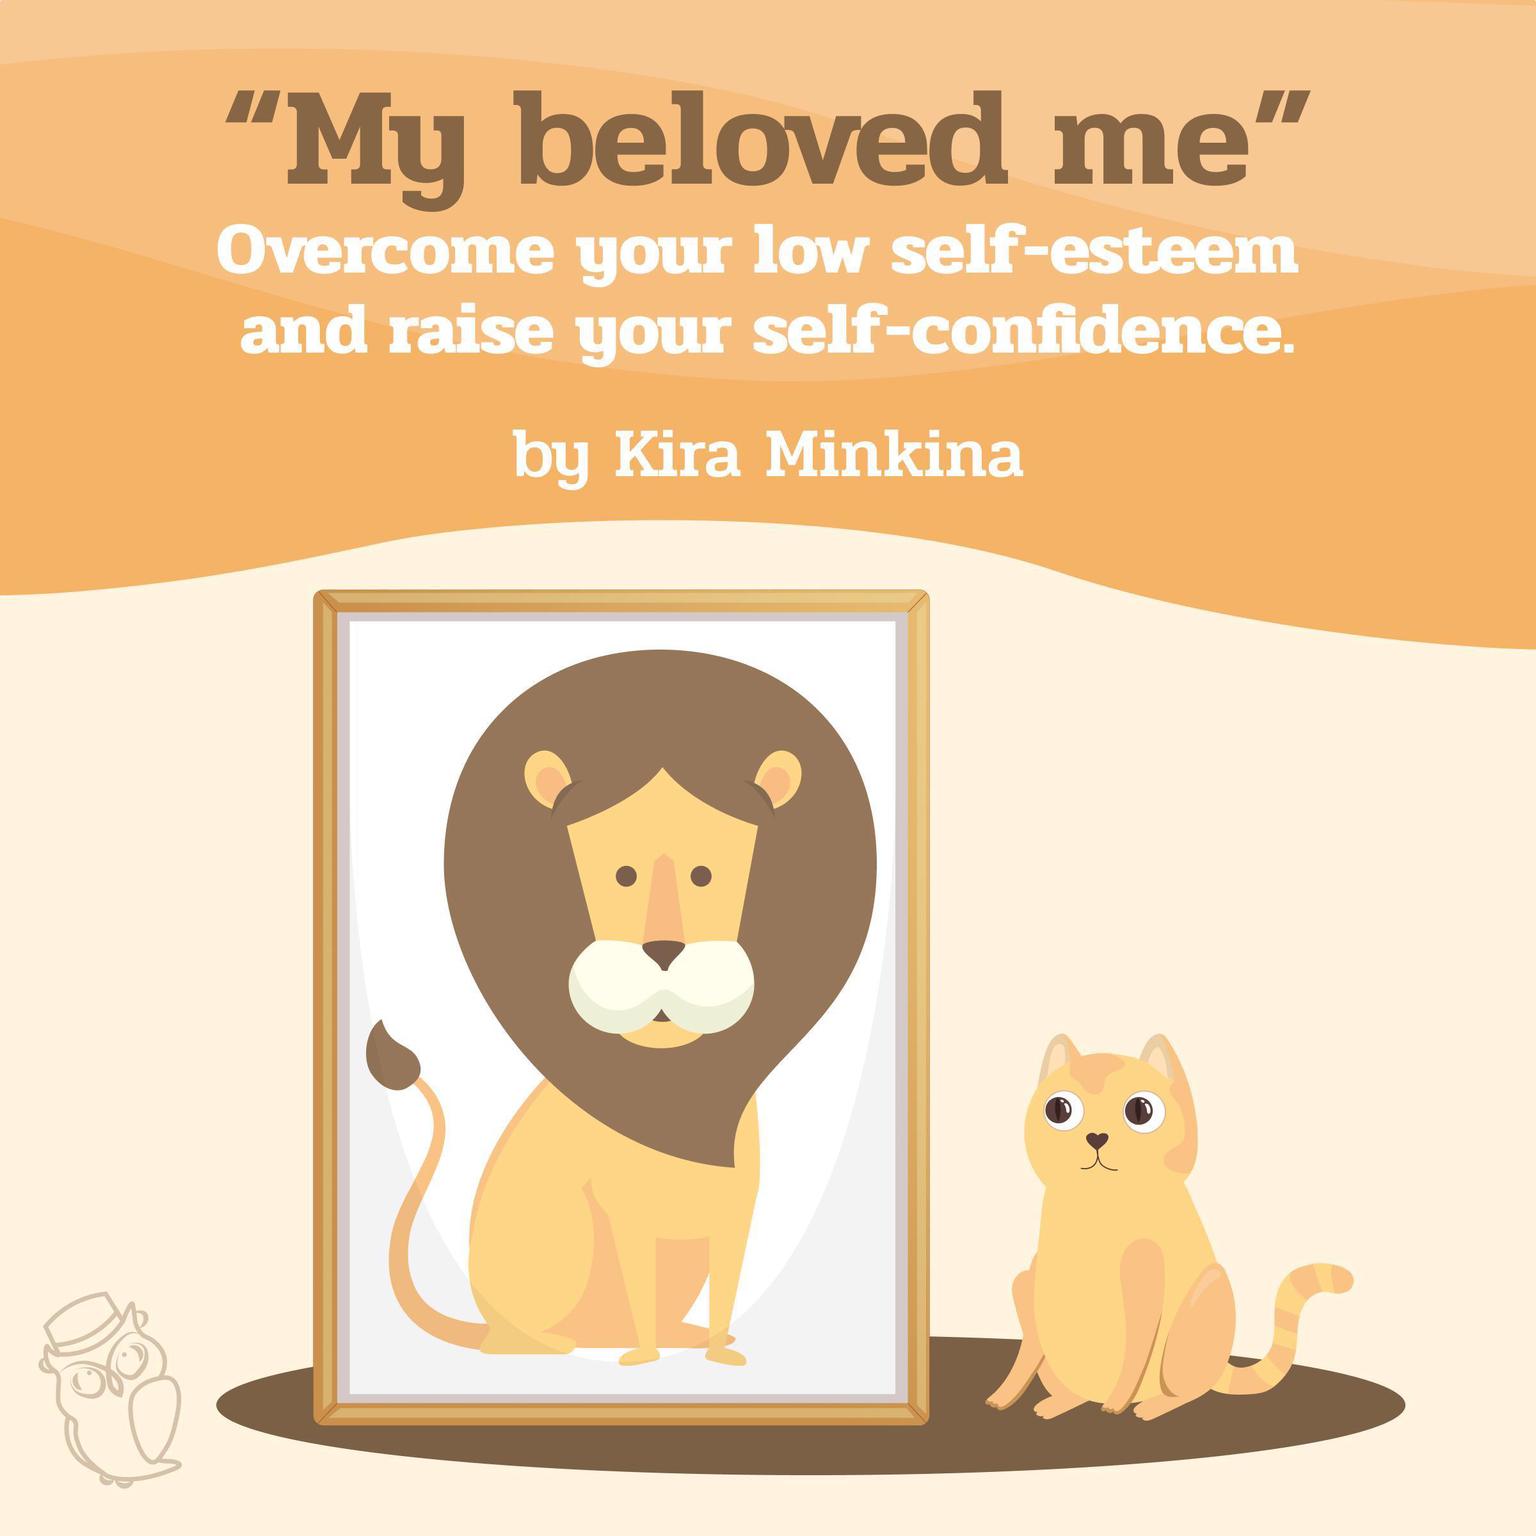 My beloved me: Overcome your low self-esteem and raise your self-confidence Audiobook, by Kira Minkina